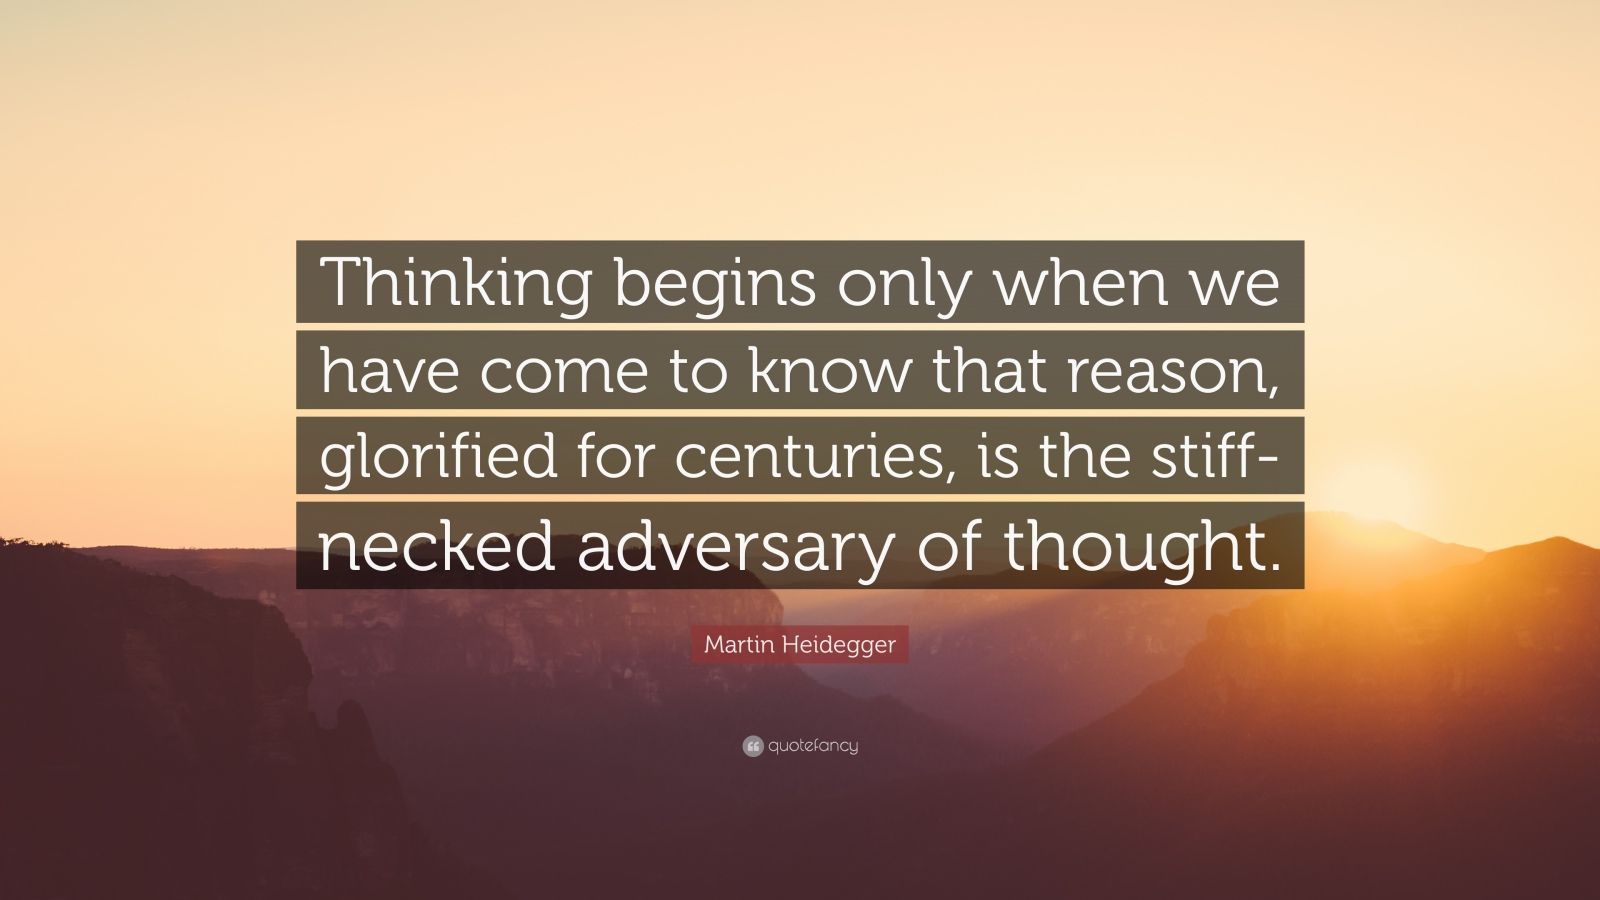 Martin Heidegger Quote: “Thinking begins only when we have come to know ...